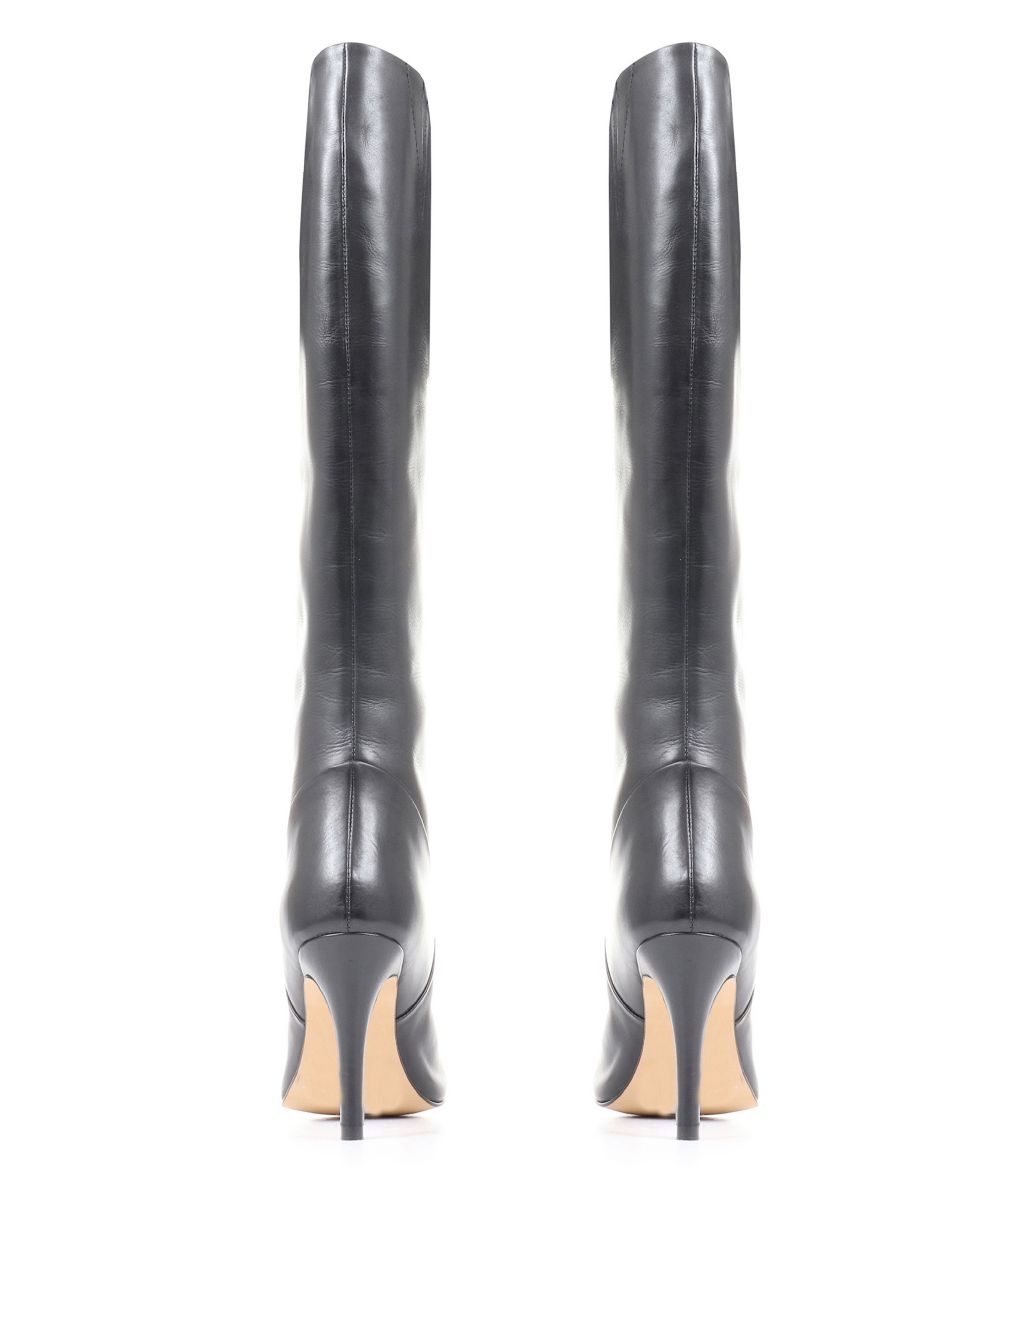 Leather Stiletto Heel Knee High Boots image 3